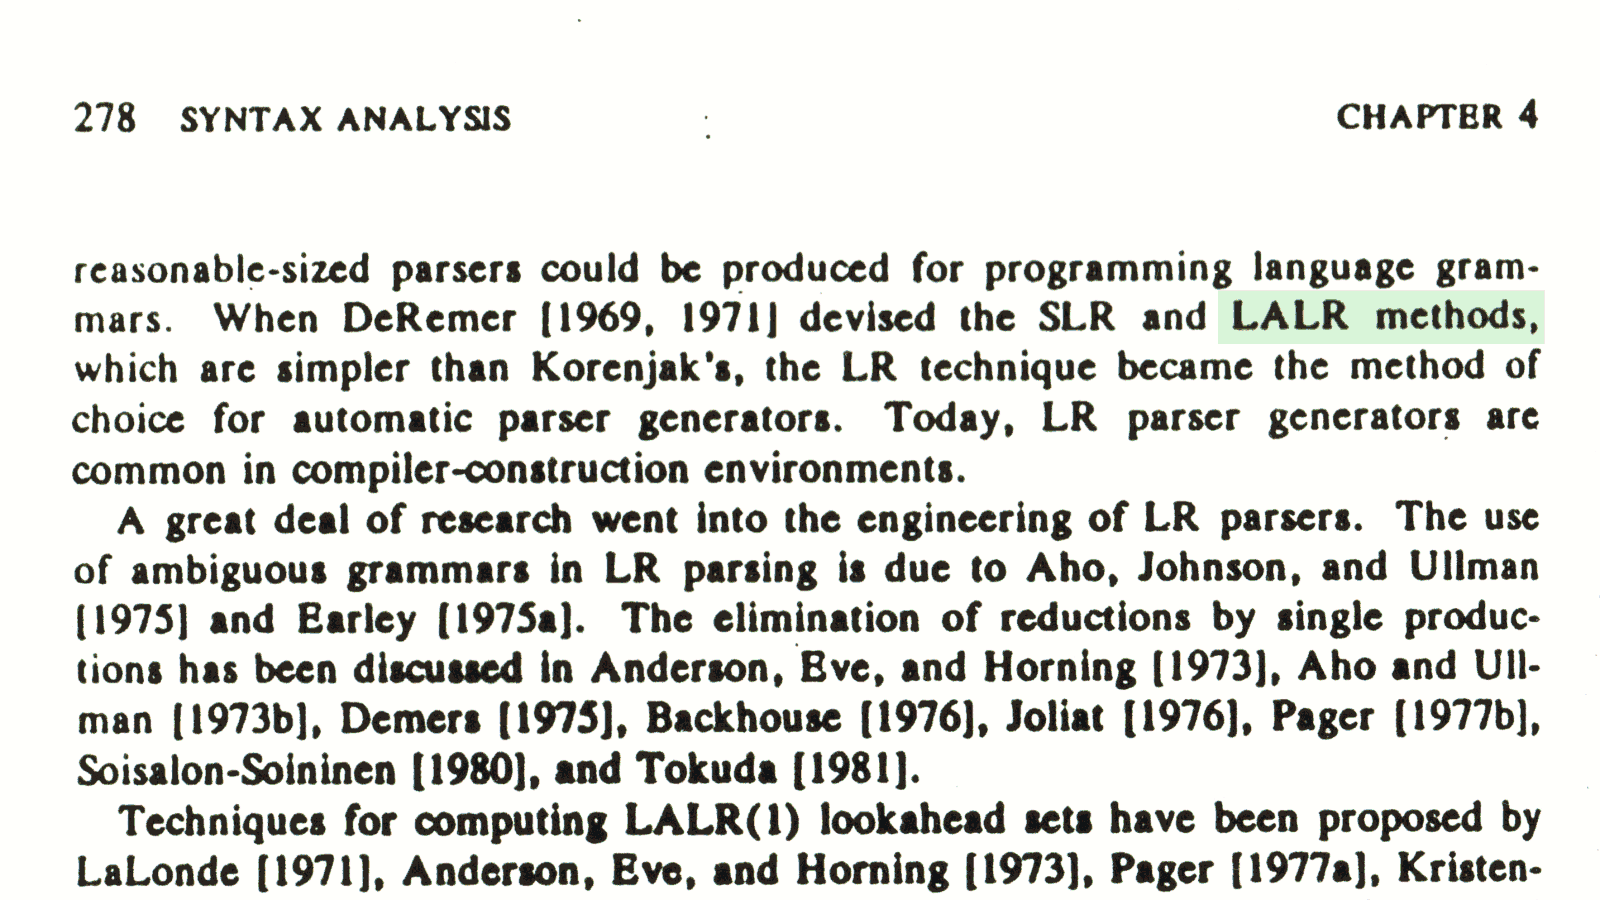 When DeRemer devised the SLR and LALR methods, which are simpler than Korenjak's, the LR technique became the method of choice for automatic parser generators. Today, LR parser generators are common in compiler-construction environments